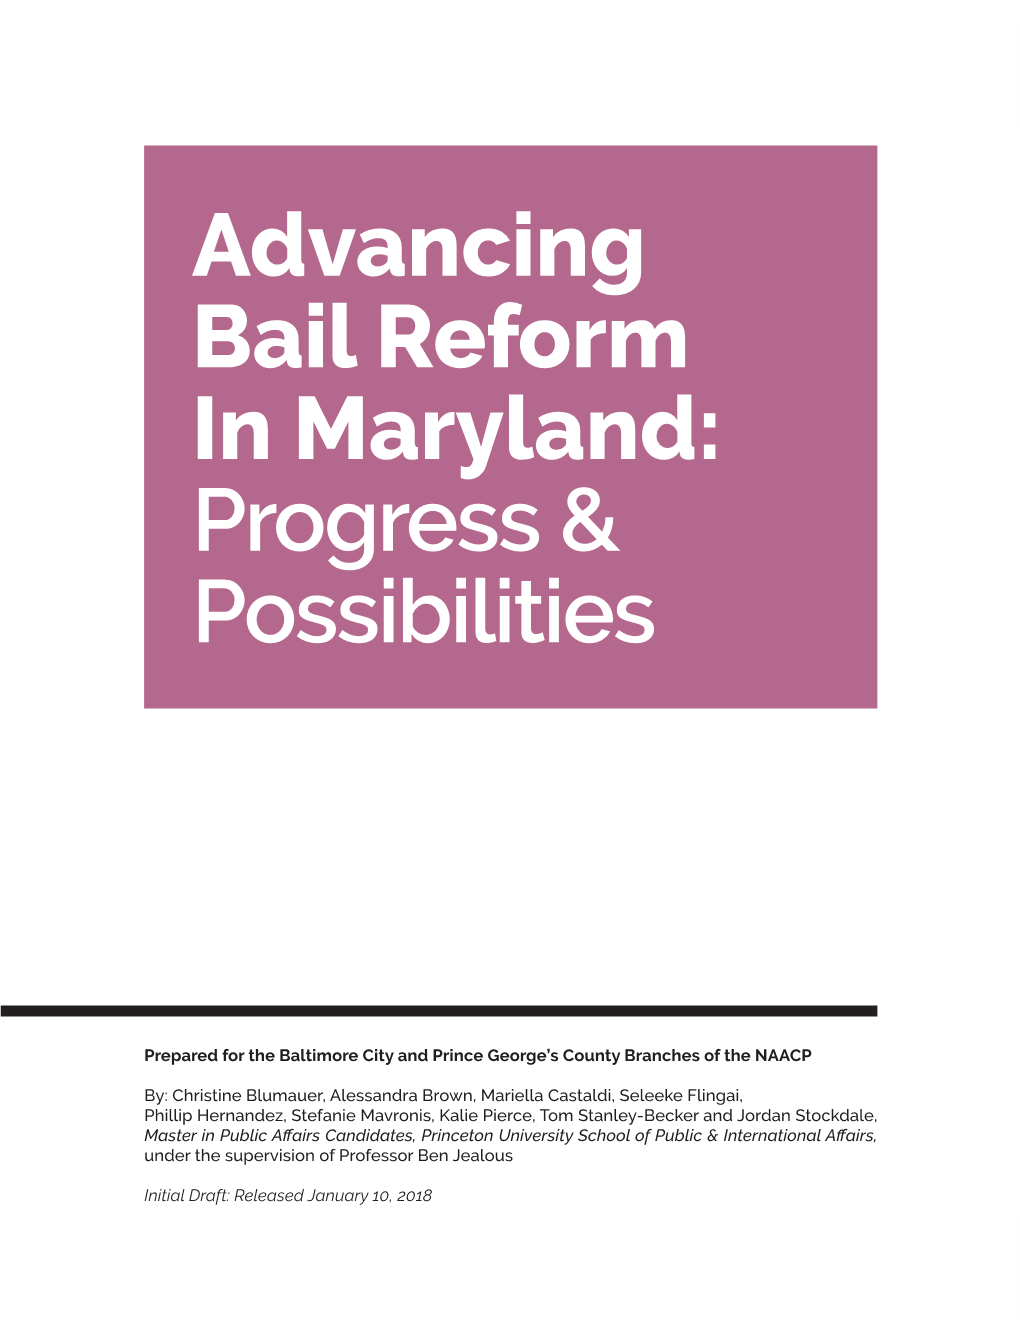 Advancing Bail Reform in Maryland: Progress & Possibilities